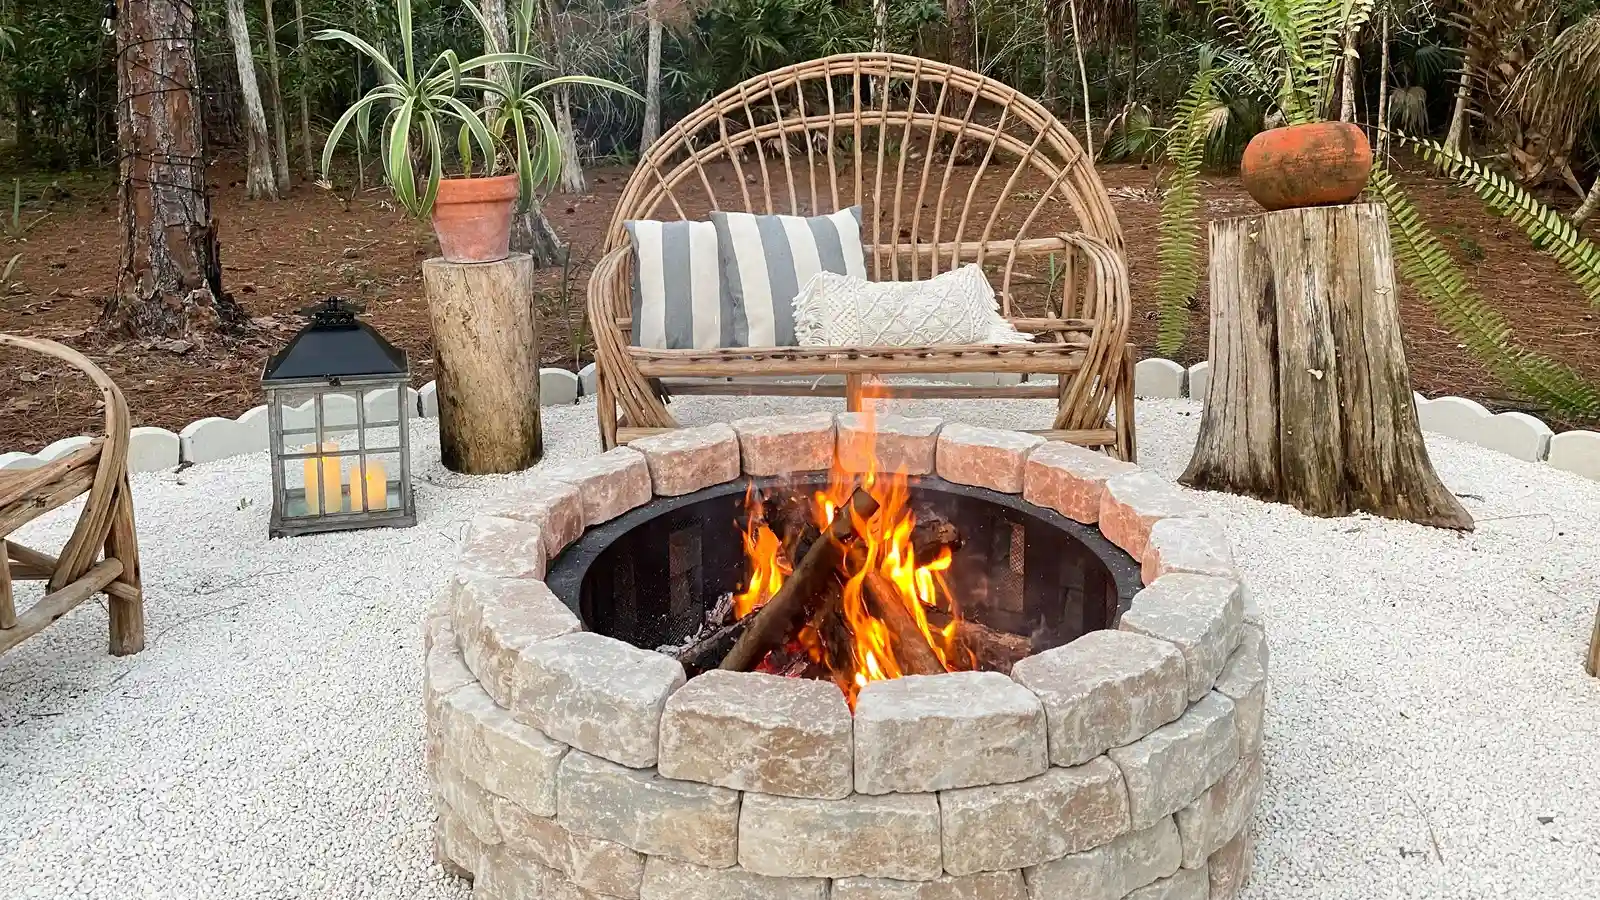 Creating a fire pit in your backyard